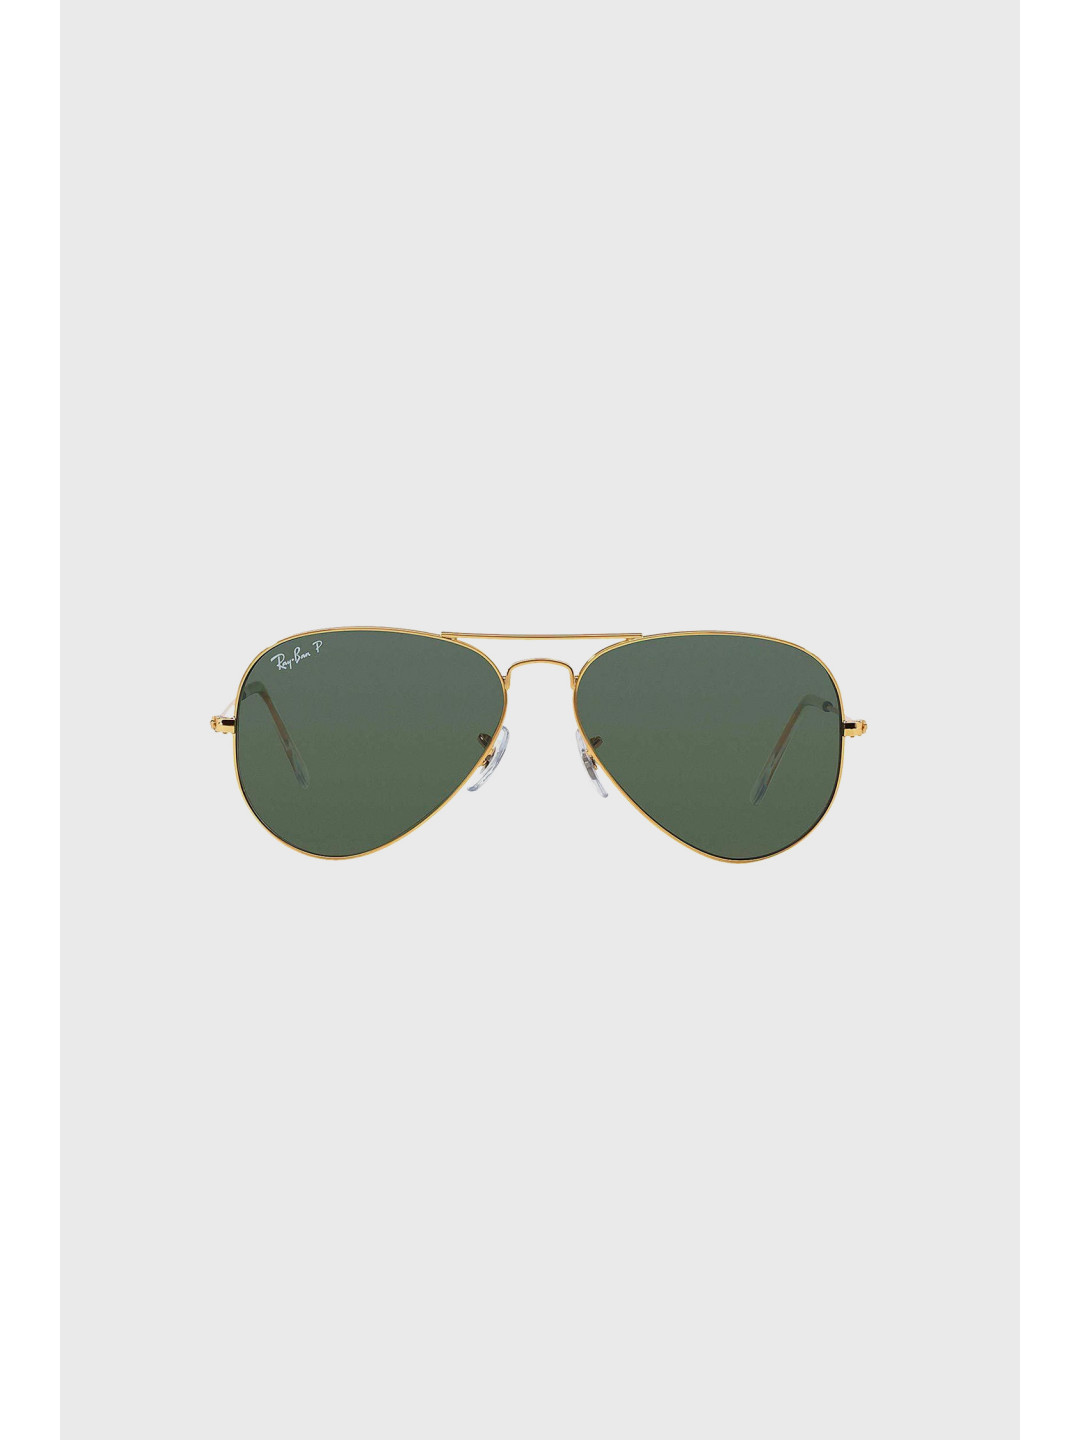 Find Latest Ray-Ban Arista Gold Large Aviator Sunglasses For men Wholesale  or Retail |by Ray-Ban in Lagos Nigeria | Dexstitches